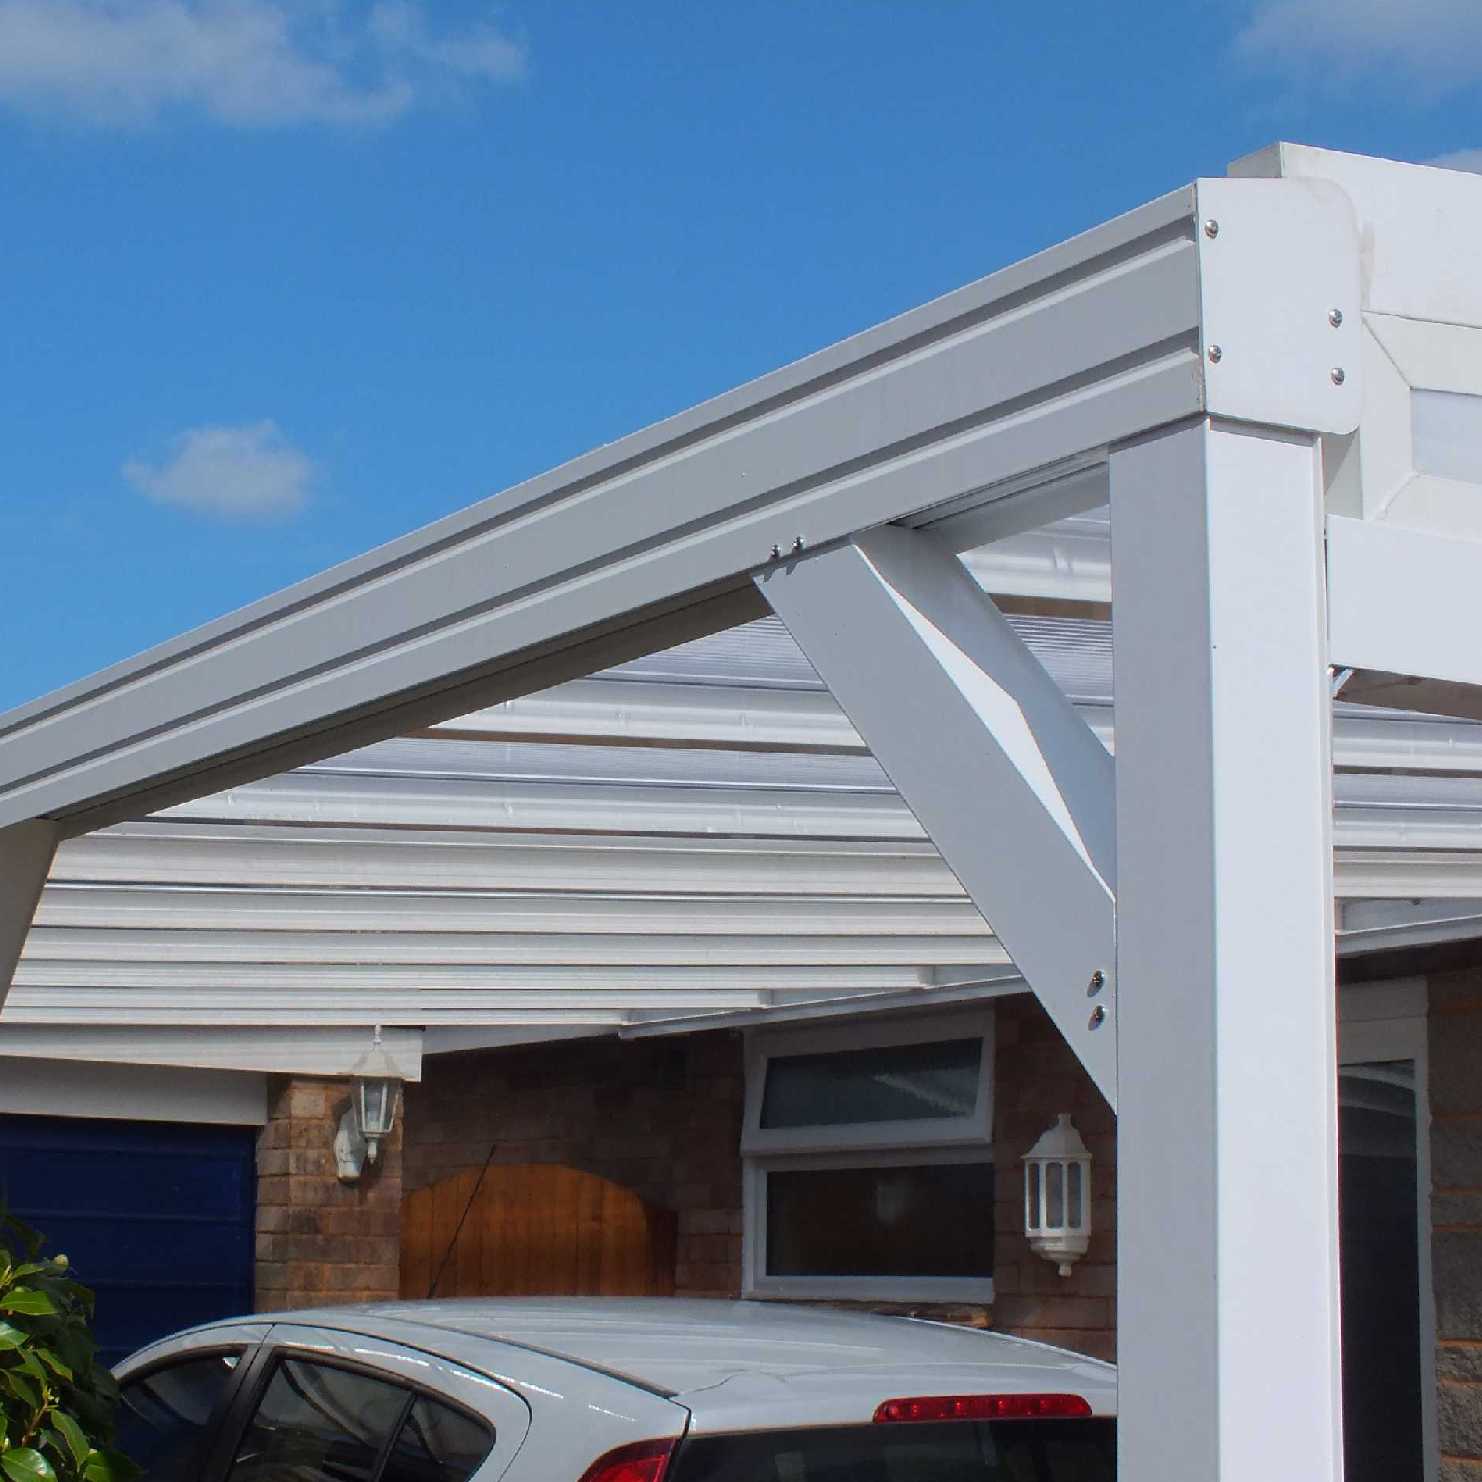 Great deals on Omega Smart Lean-To Canopy, White with 16mm Polycarbonate Glazing - 11.6m (W) x 2.5m (P), (5) Supporting Posts